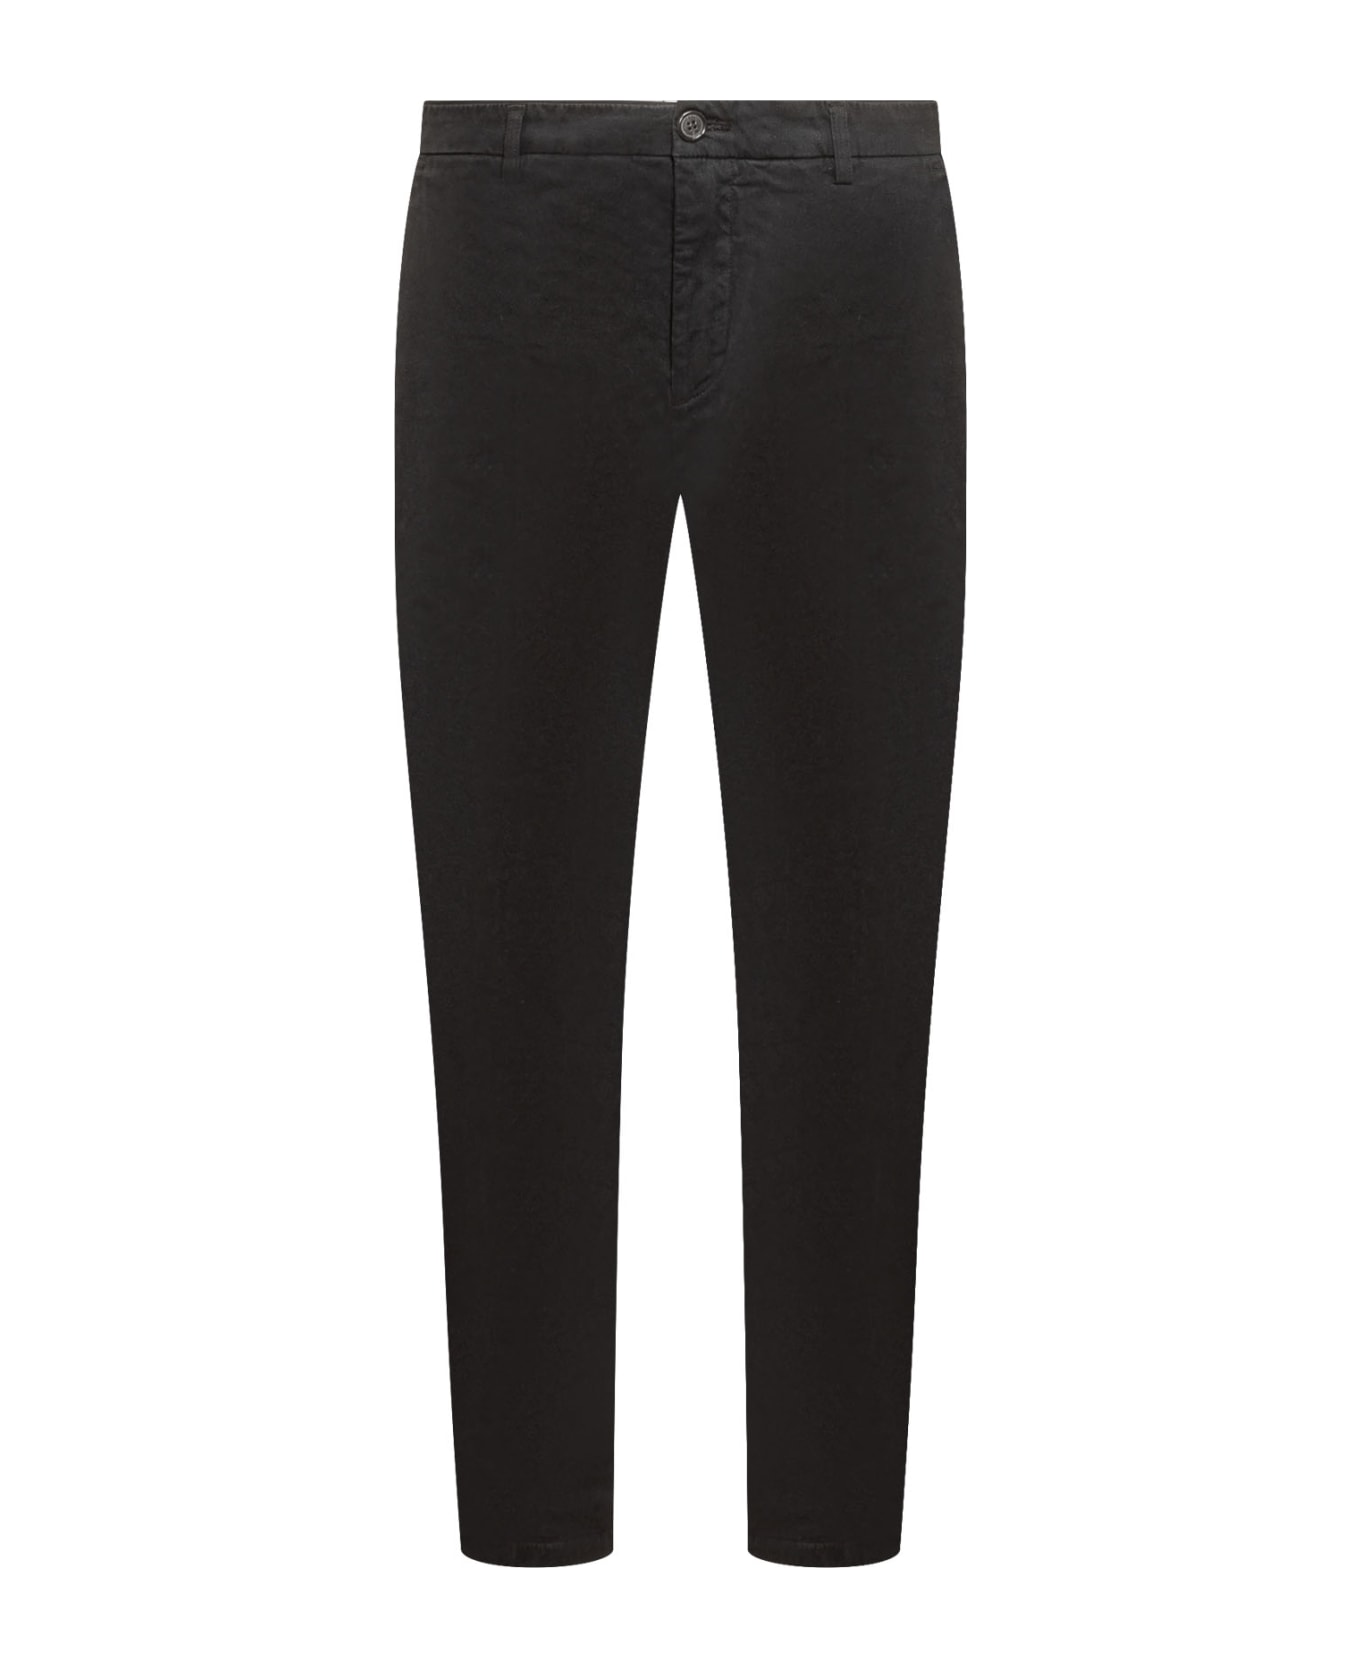 Department Five Prince Trousers Chinos - NERO